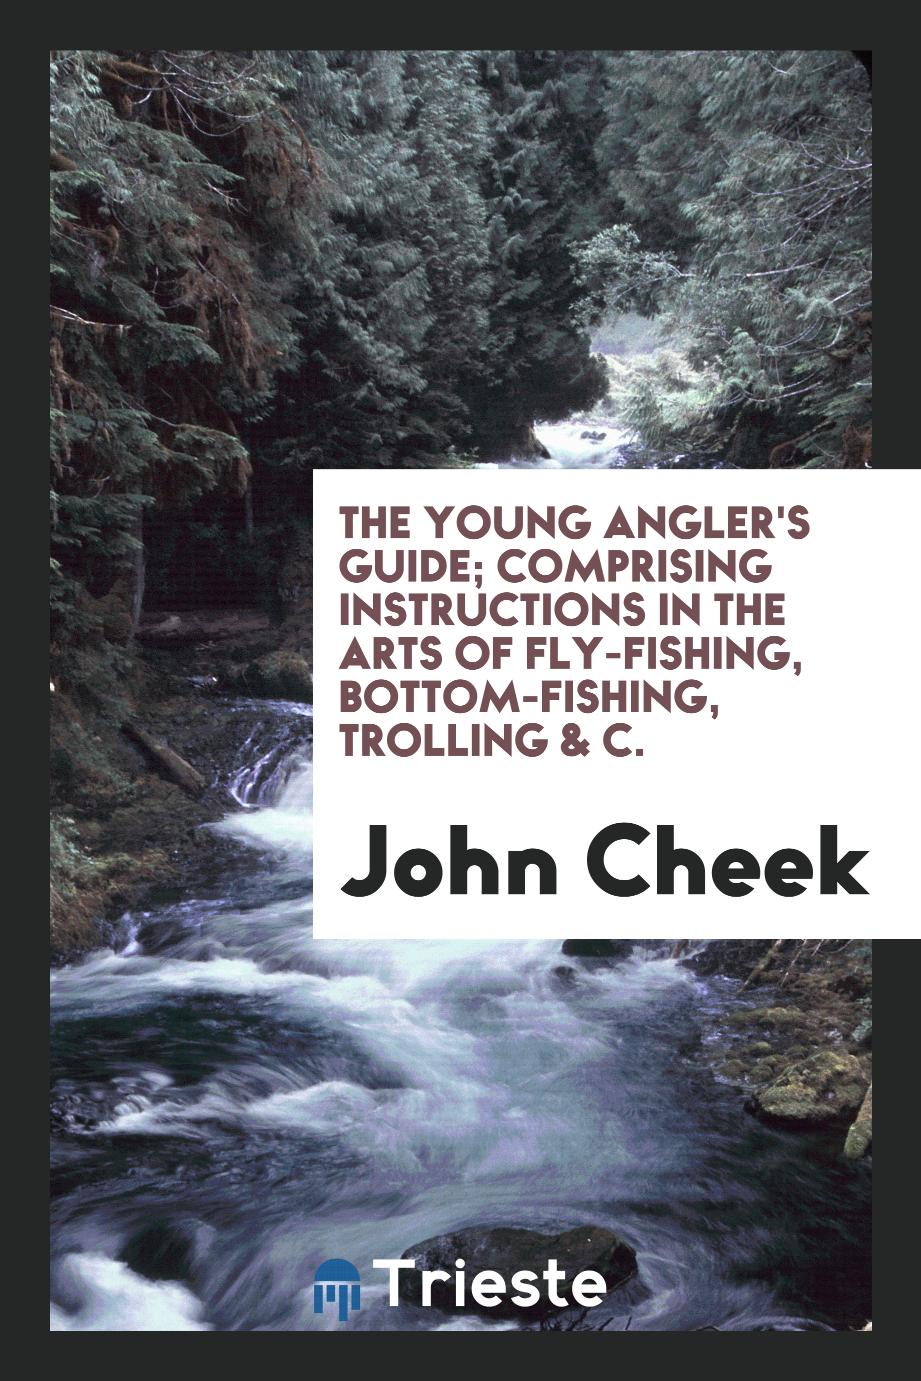 The Young Angler's Guide; Comprising Instructions in the Arts of Fly-Fishing, Bottom-Fishing, Trolling & C.